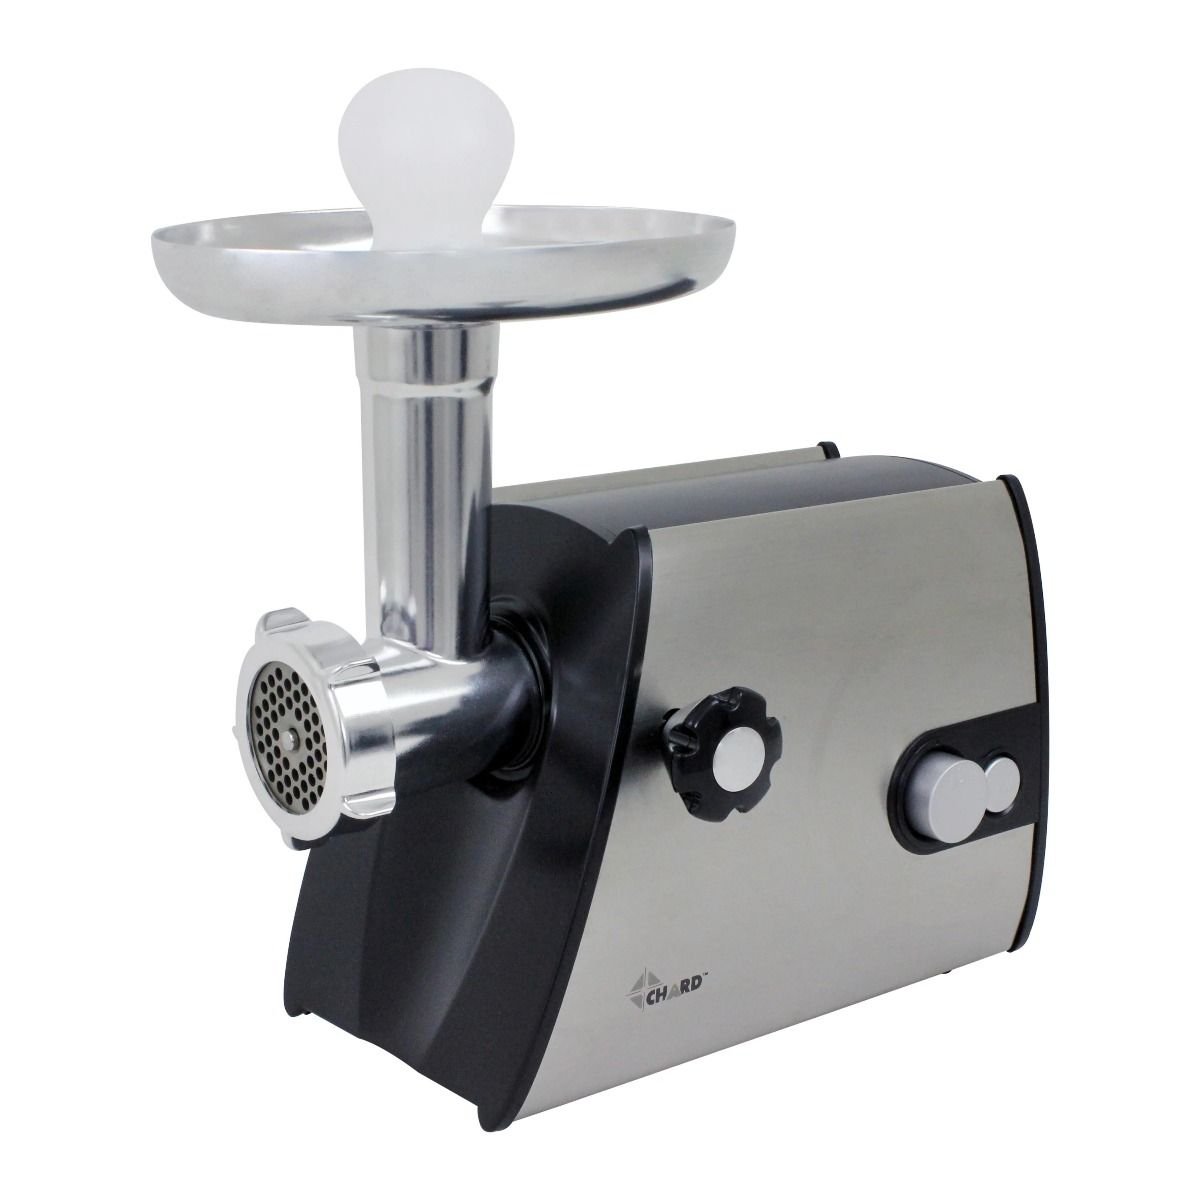 Aluminum Meat Grinder 10# Stuffers Manual Sausage Stuffer With Tubes Tool  Mincer For Home Kitchen Accessories